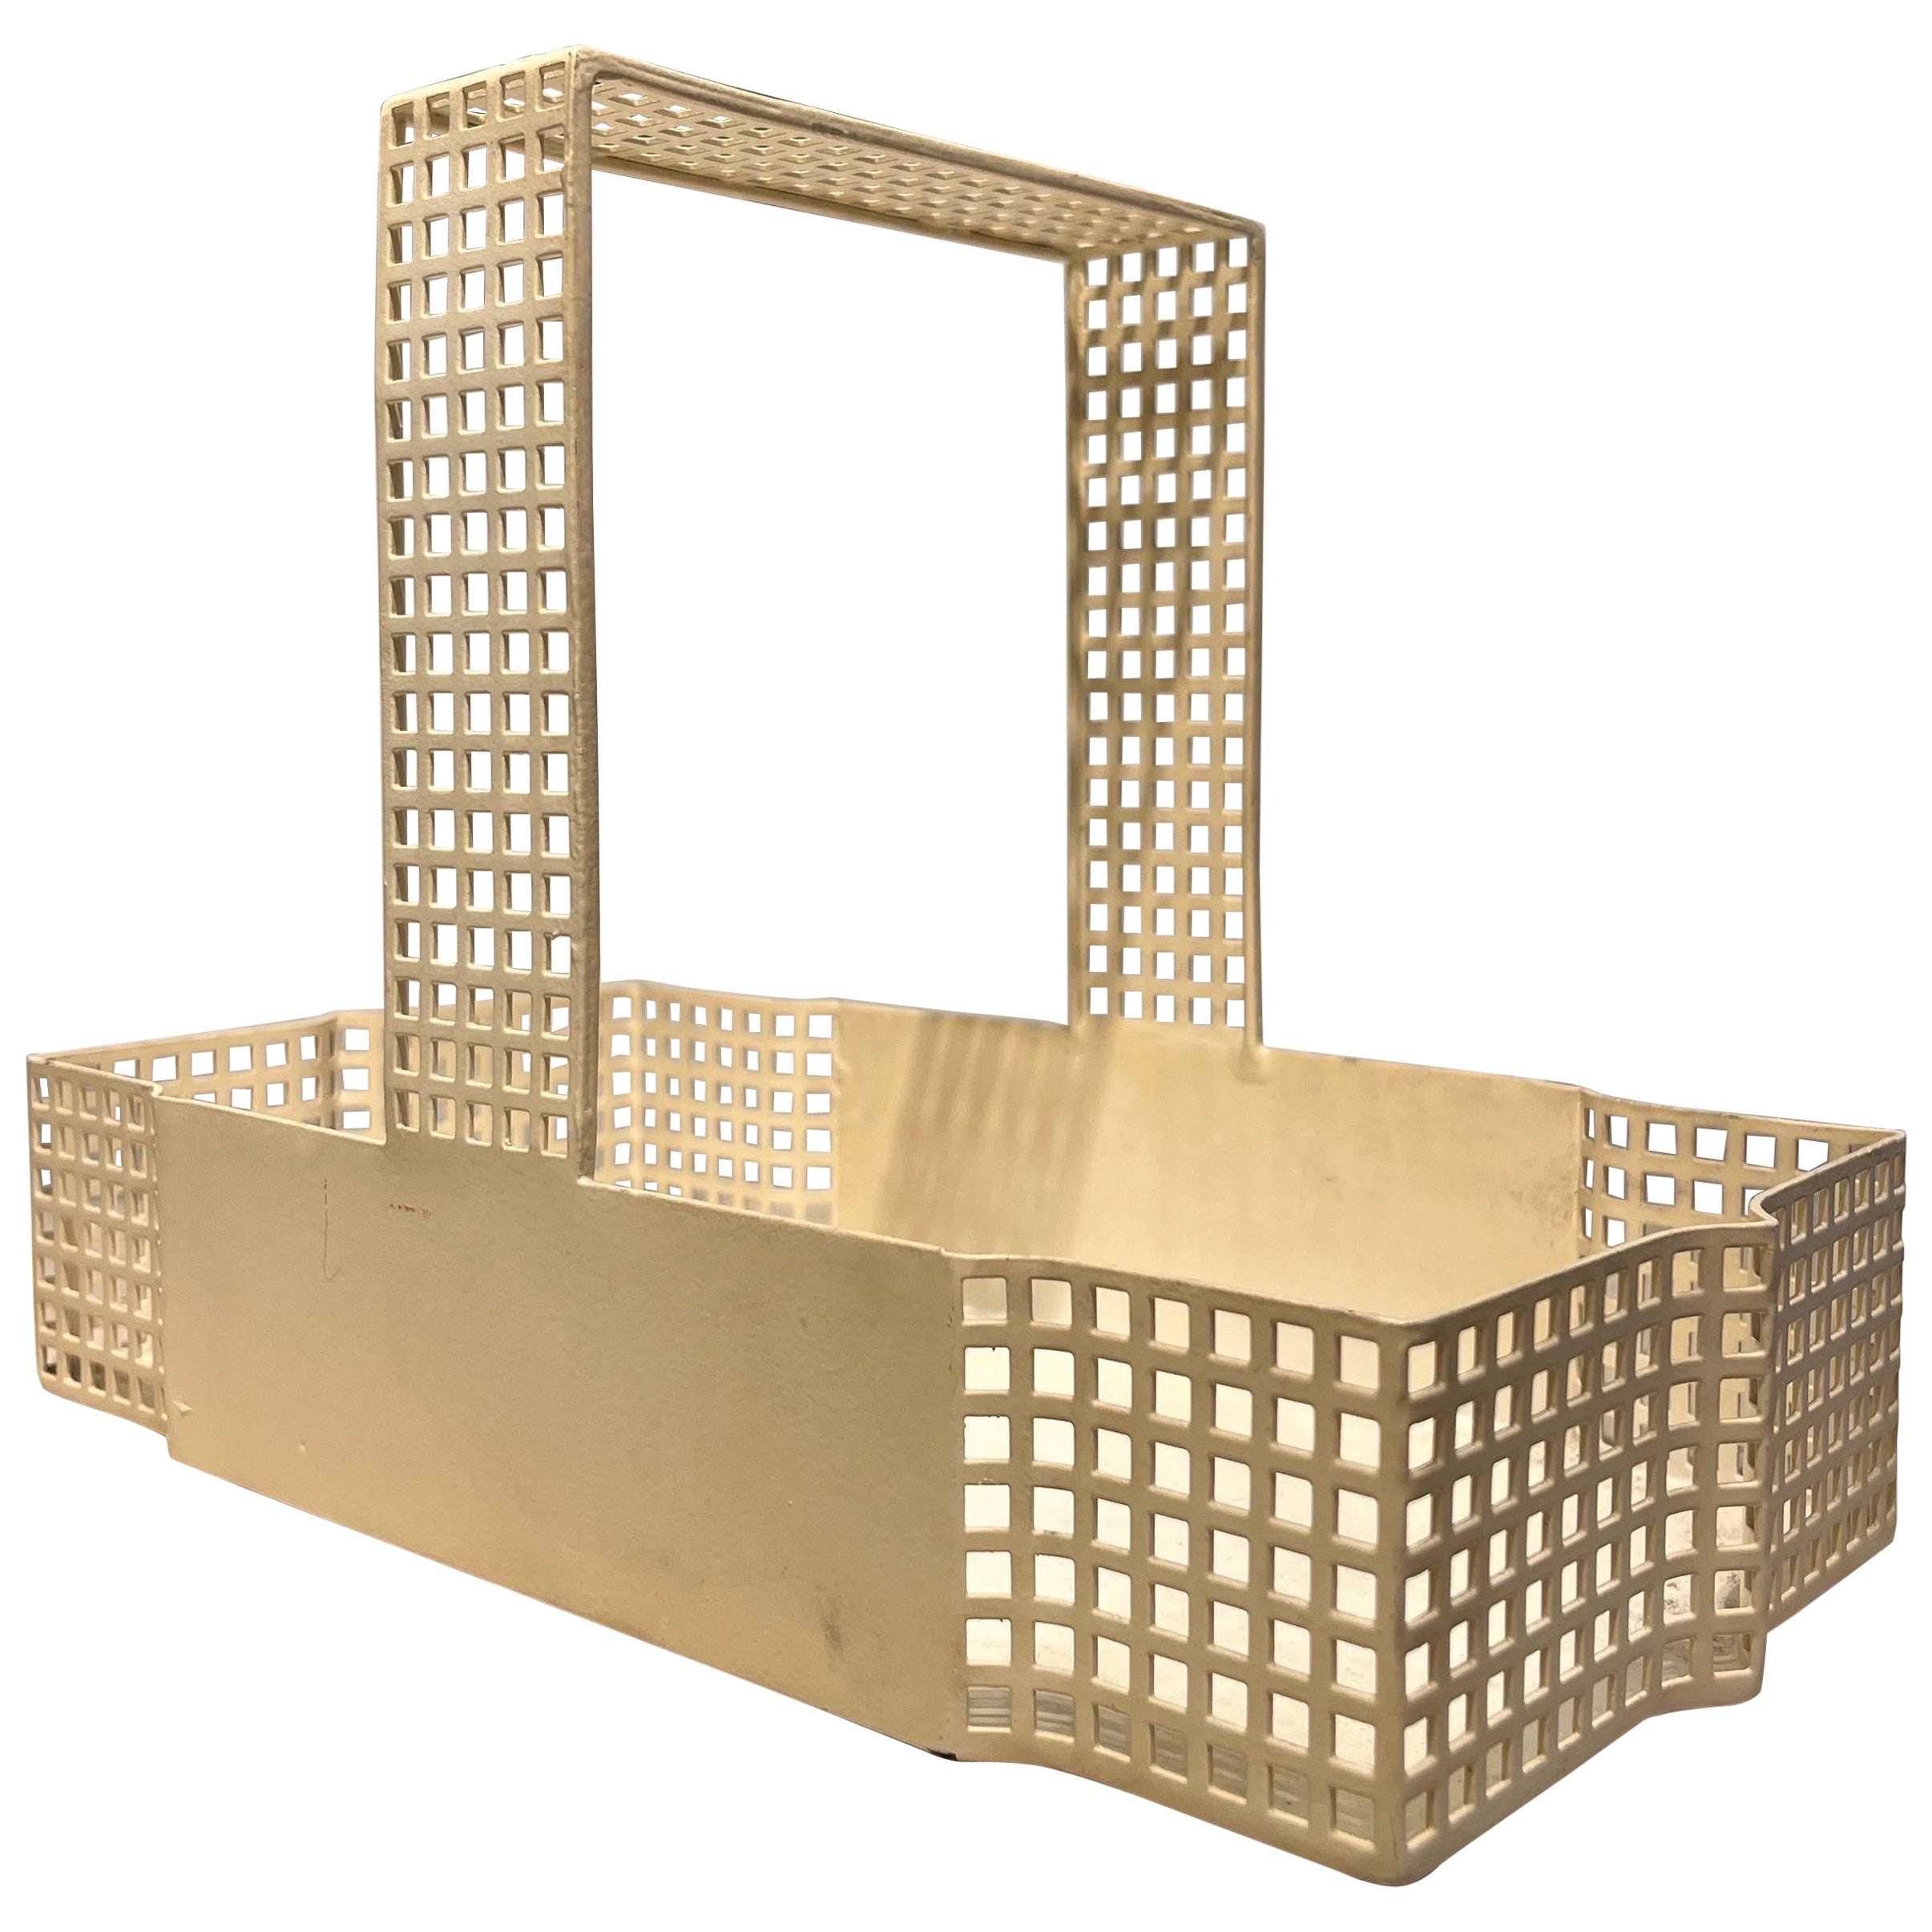 White Lacquered Metal Basket by Josef Hoffman for Bieffeplast, 1980s